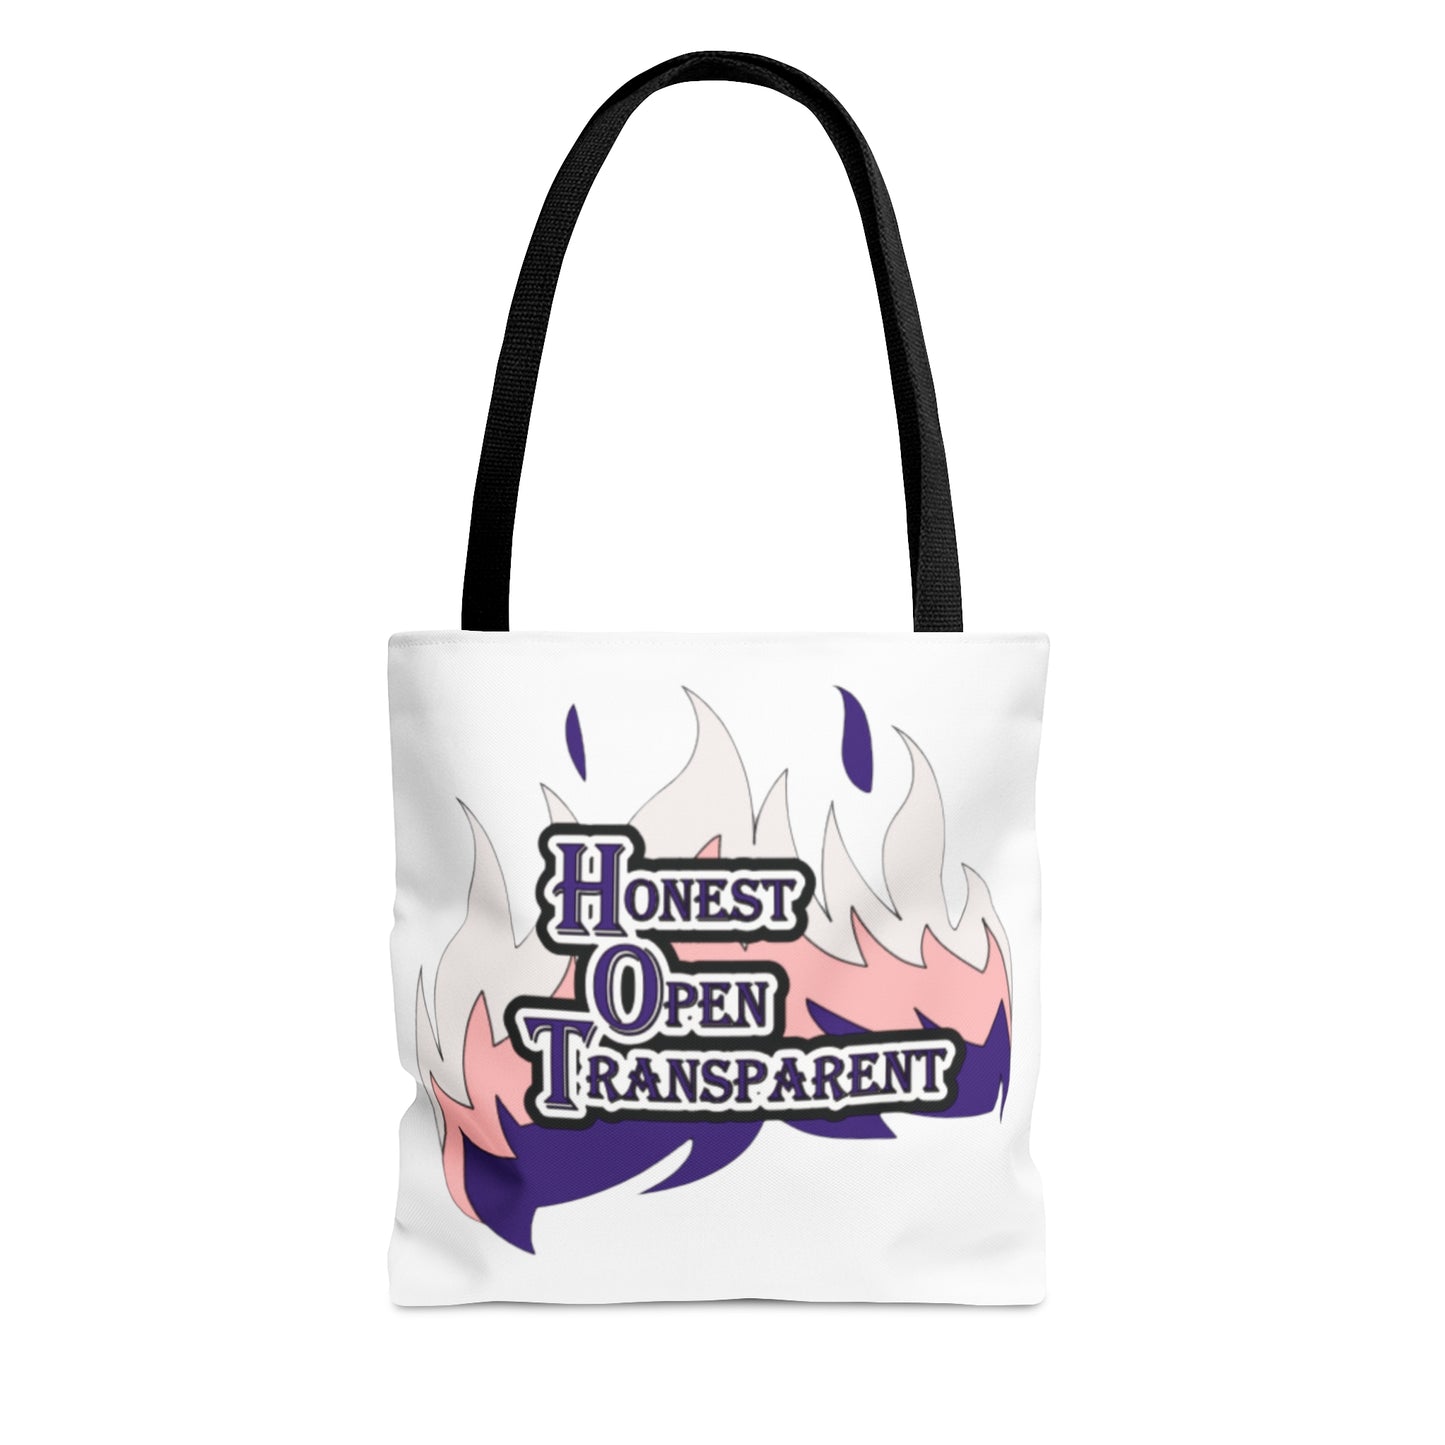 H.O.T. Honest, Open, and Transparent Tote Bag (White)